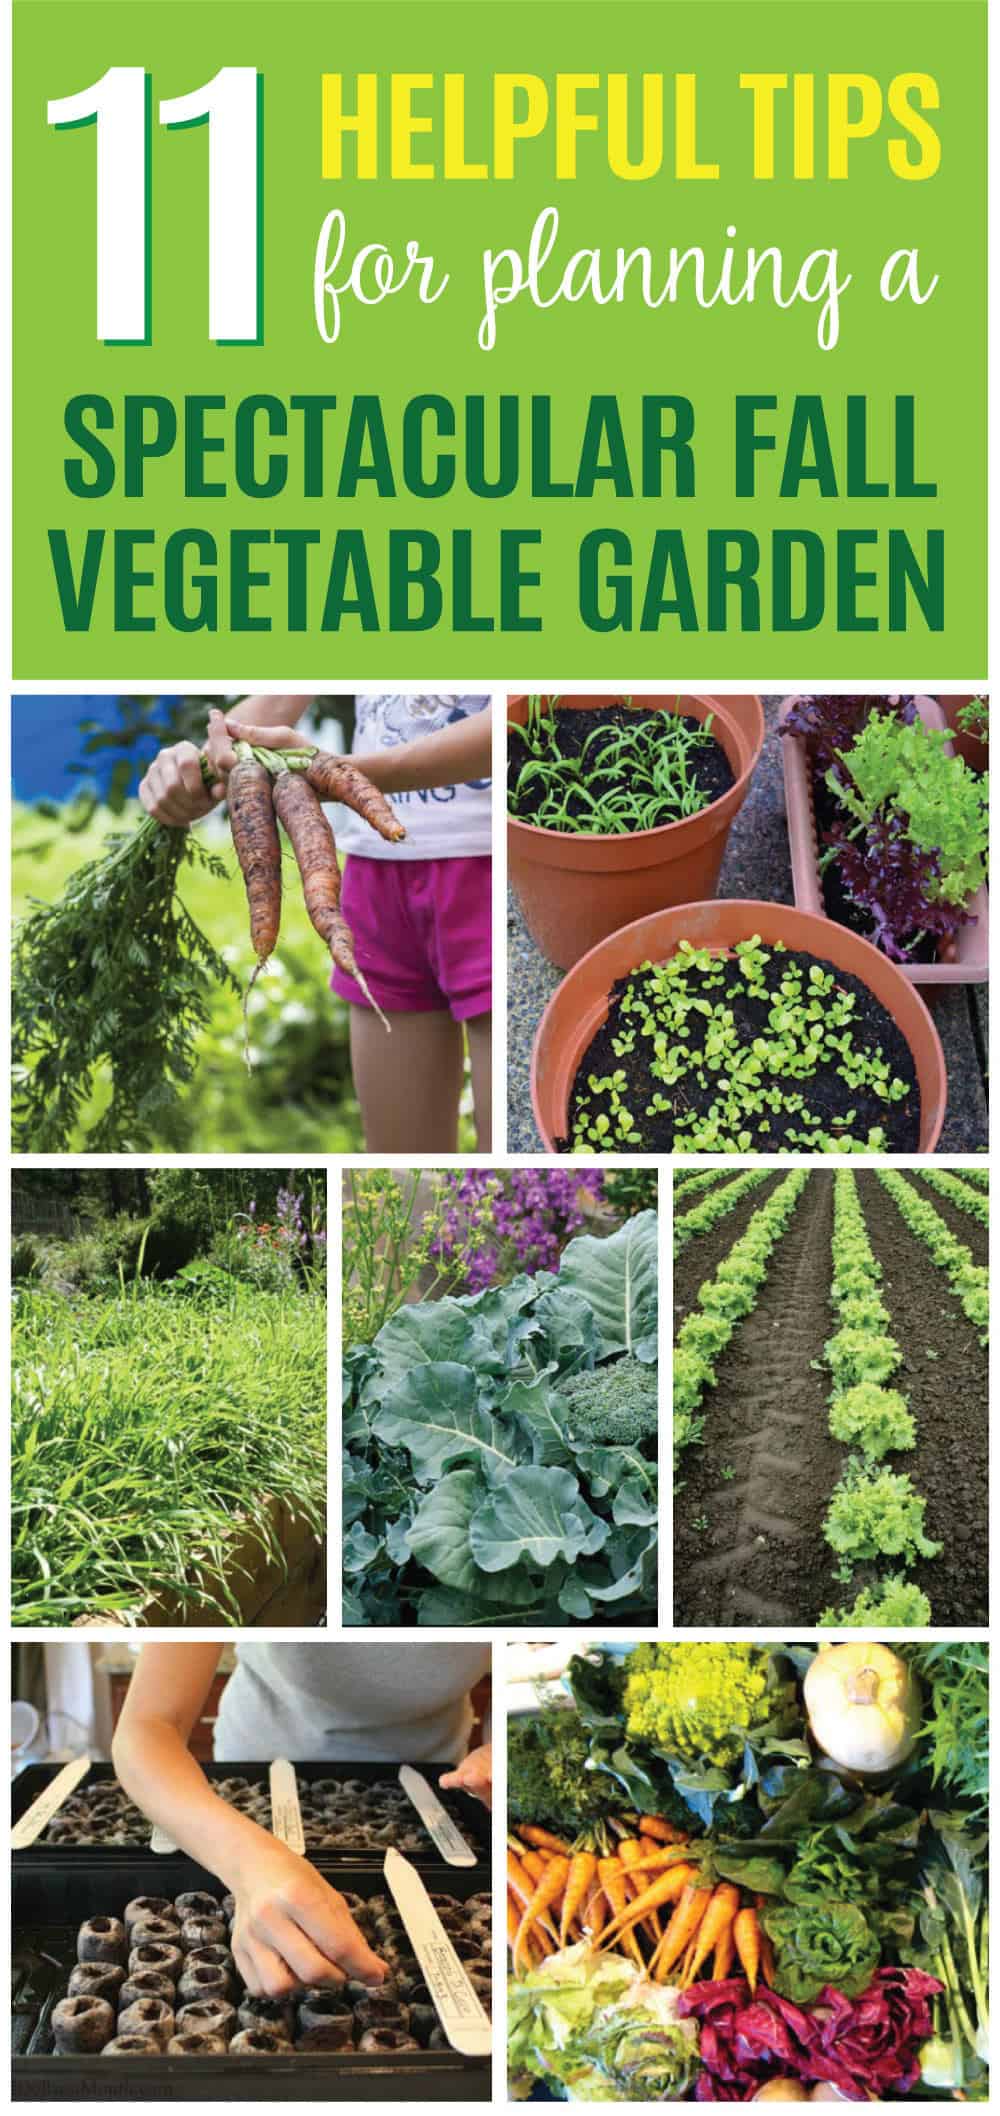 If you've never had a fall vegetable garden, you're missing a real treat. These 11 helpful tips are all you need to know to plan, plant, and enjoy the harvest from a fall vegetable garden in your yard.